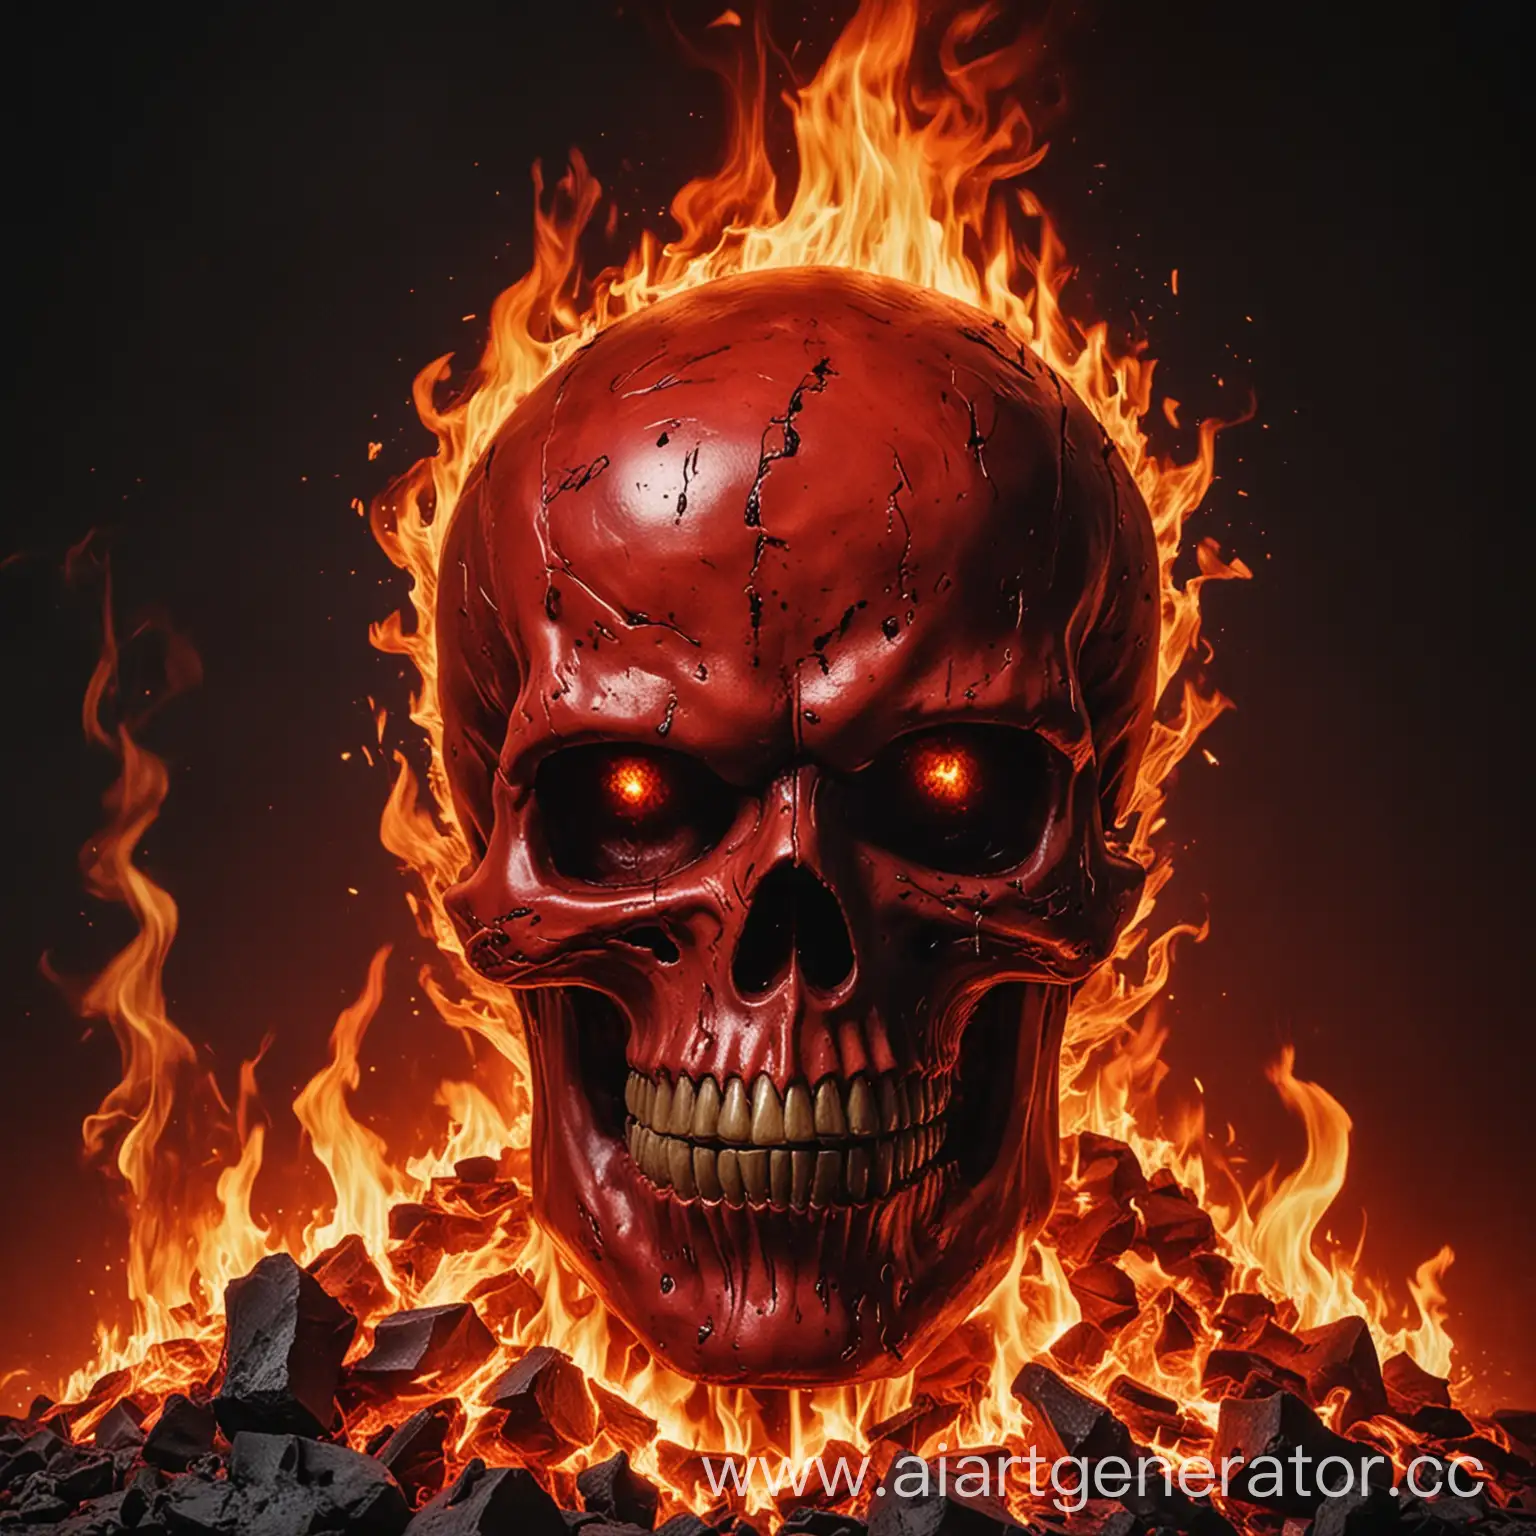 Intense-Red-Skull-Engulfed-in-Flames